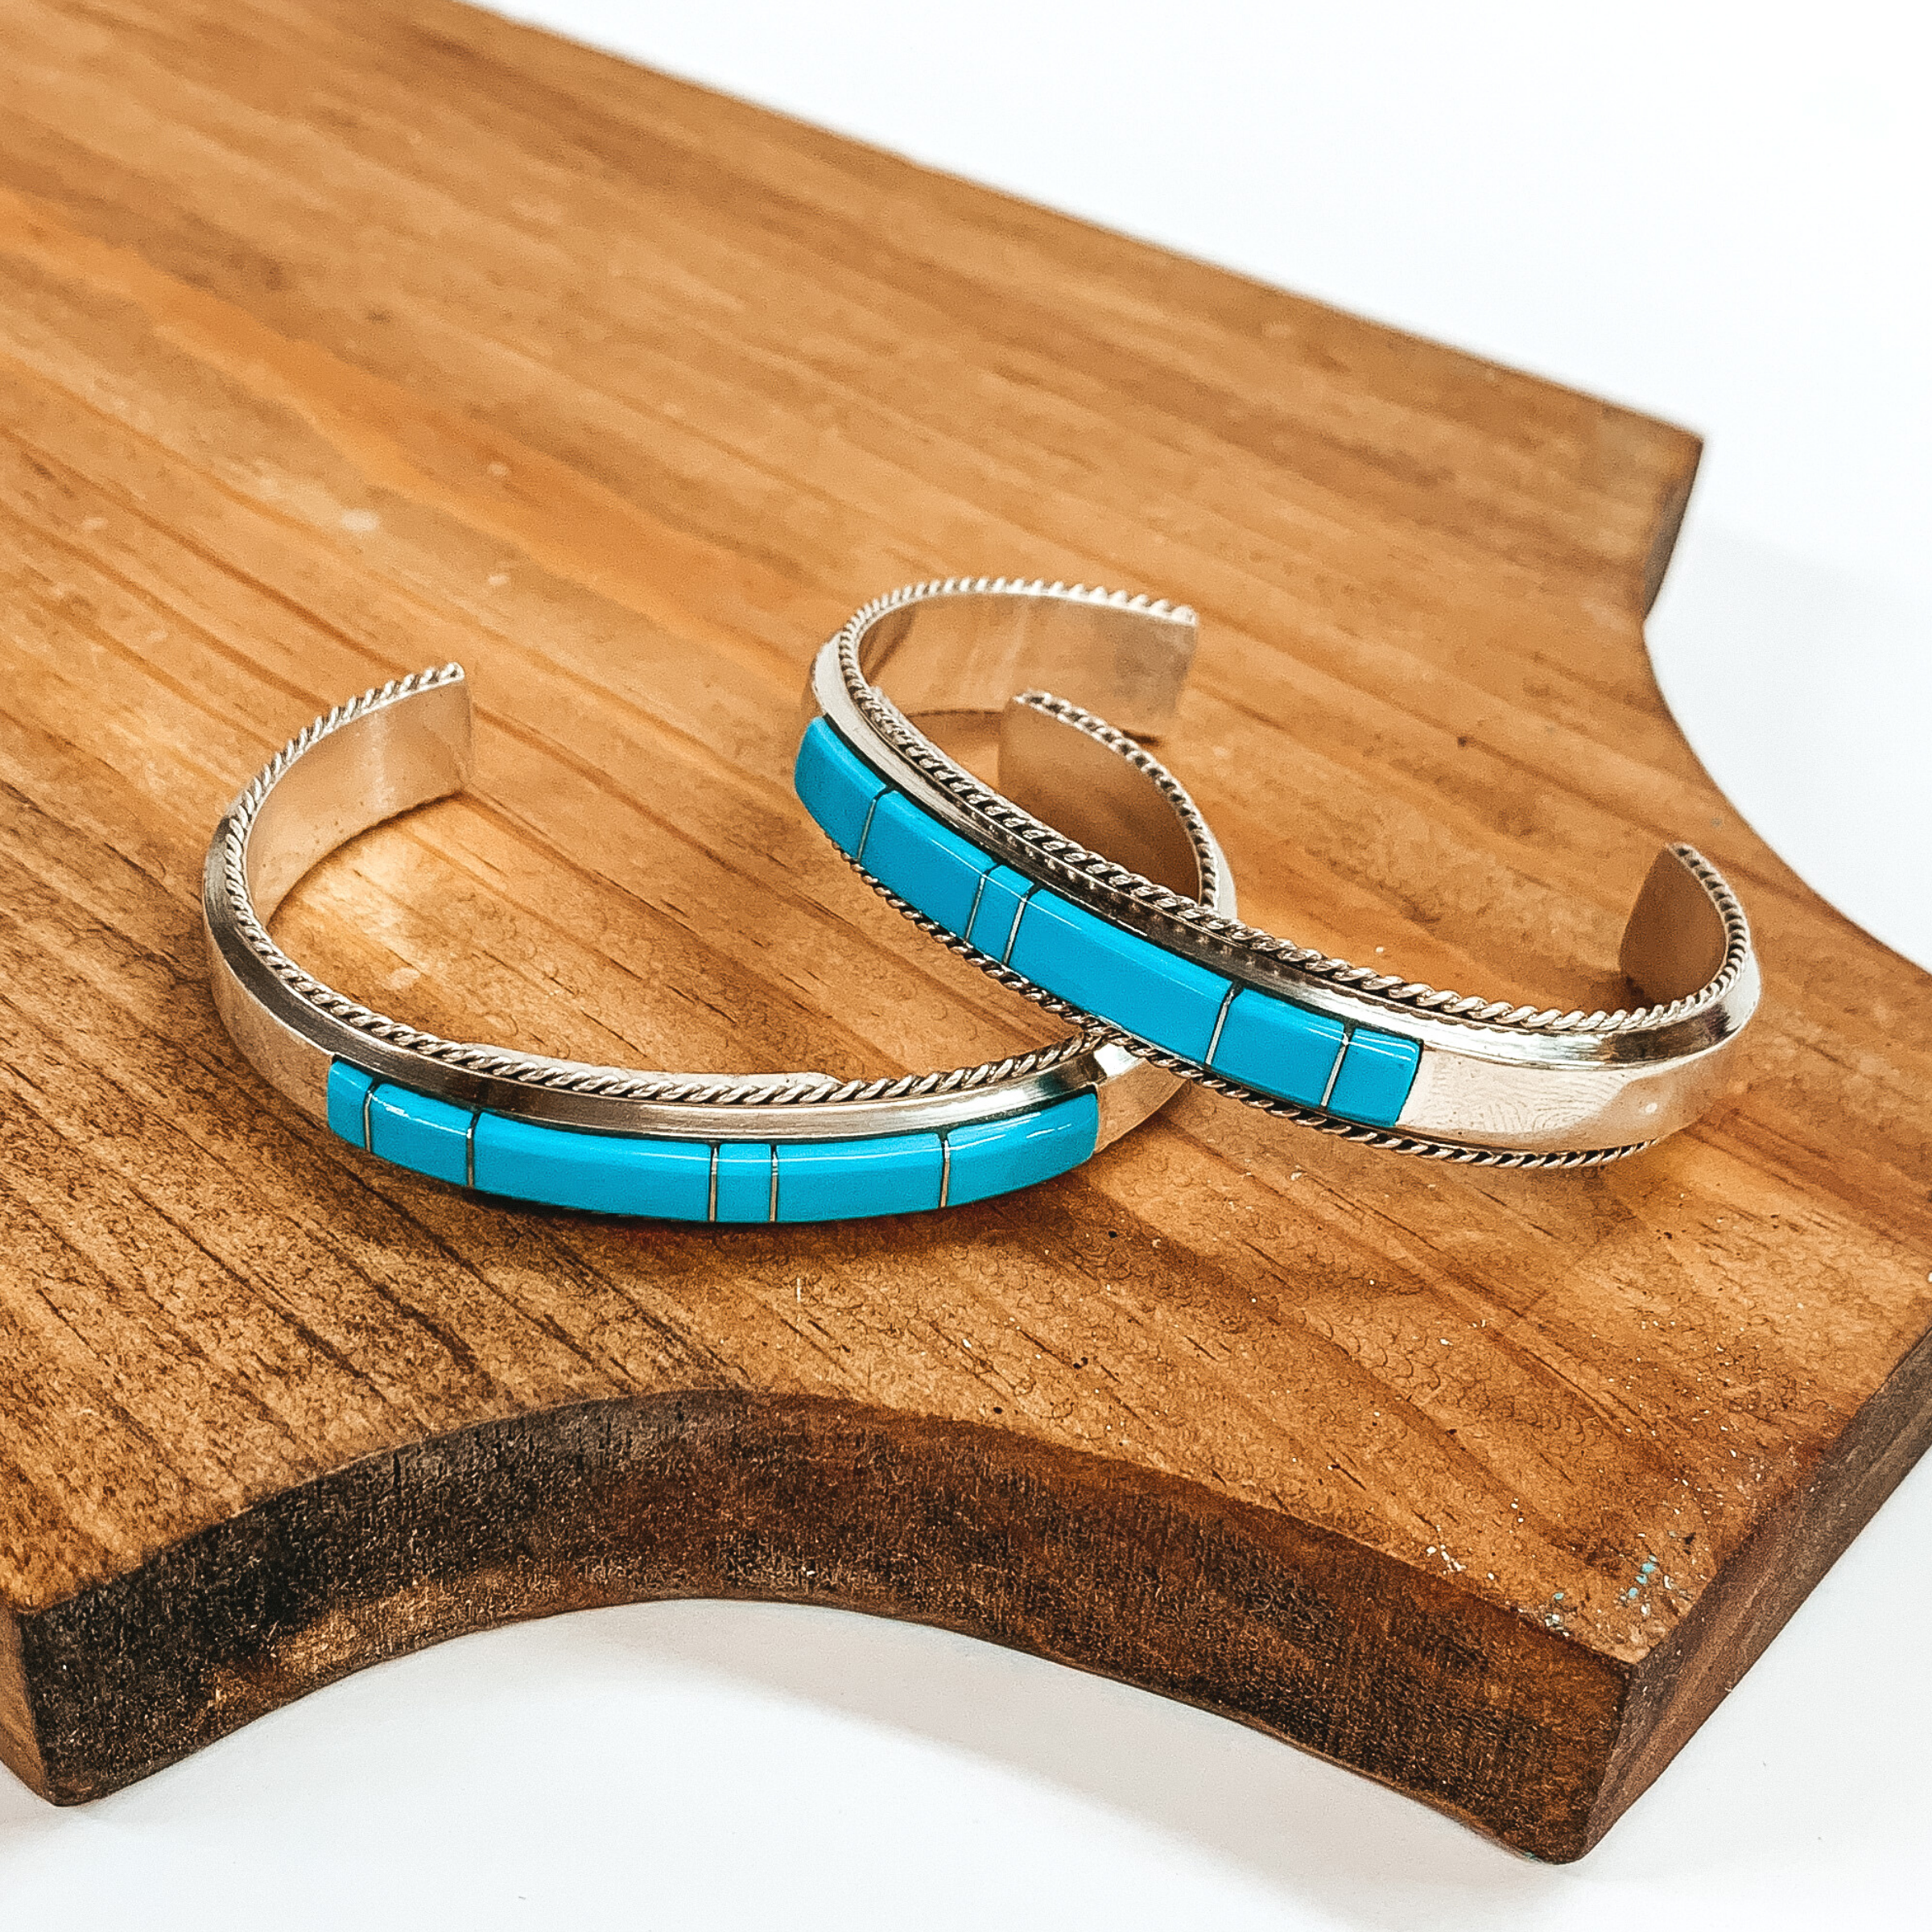 Two silver cuff bracelet with rope detailing outline. These bracelets include turquoise stones divided by silver spacers. These bracelets are pictured on top of a brown block on a white background. 